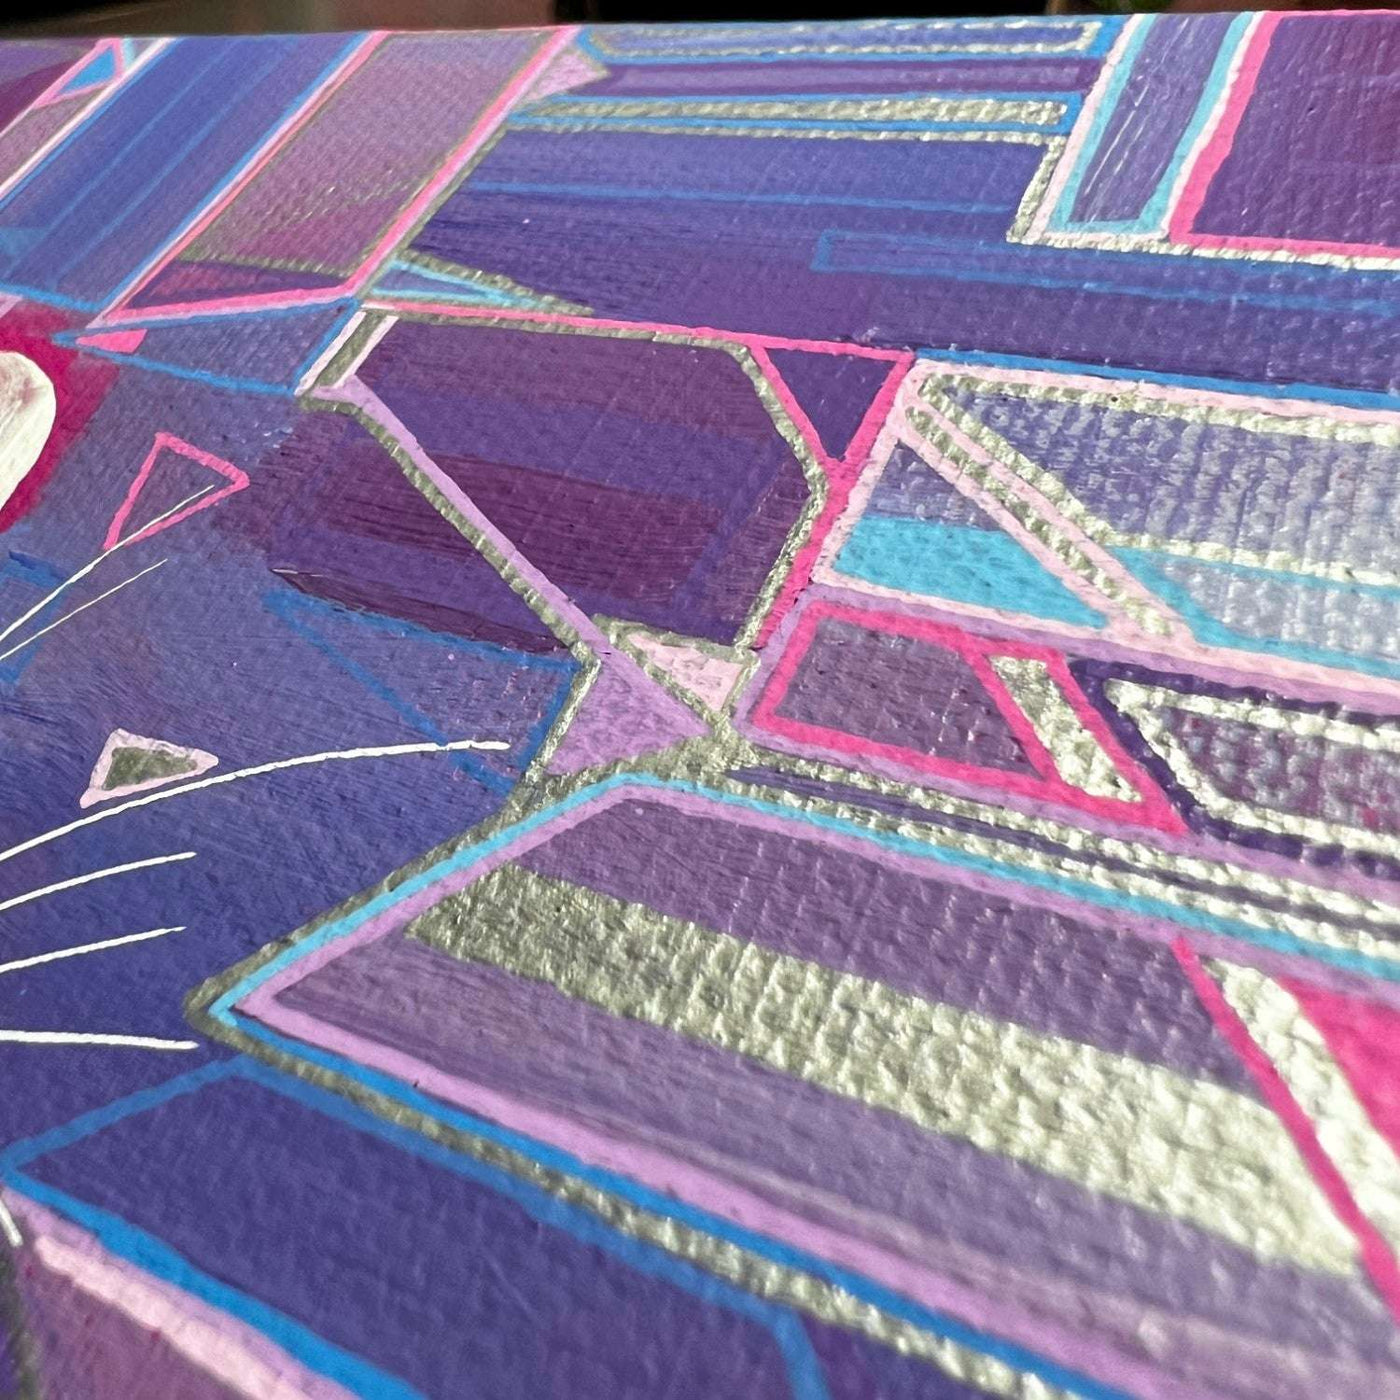 Close-up of rat original artwork featuring textured lines and geometric shapes in shades of purple, blue, and pink.